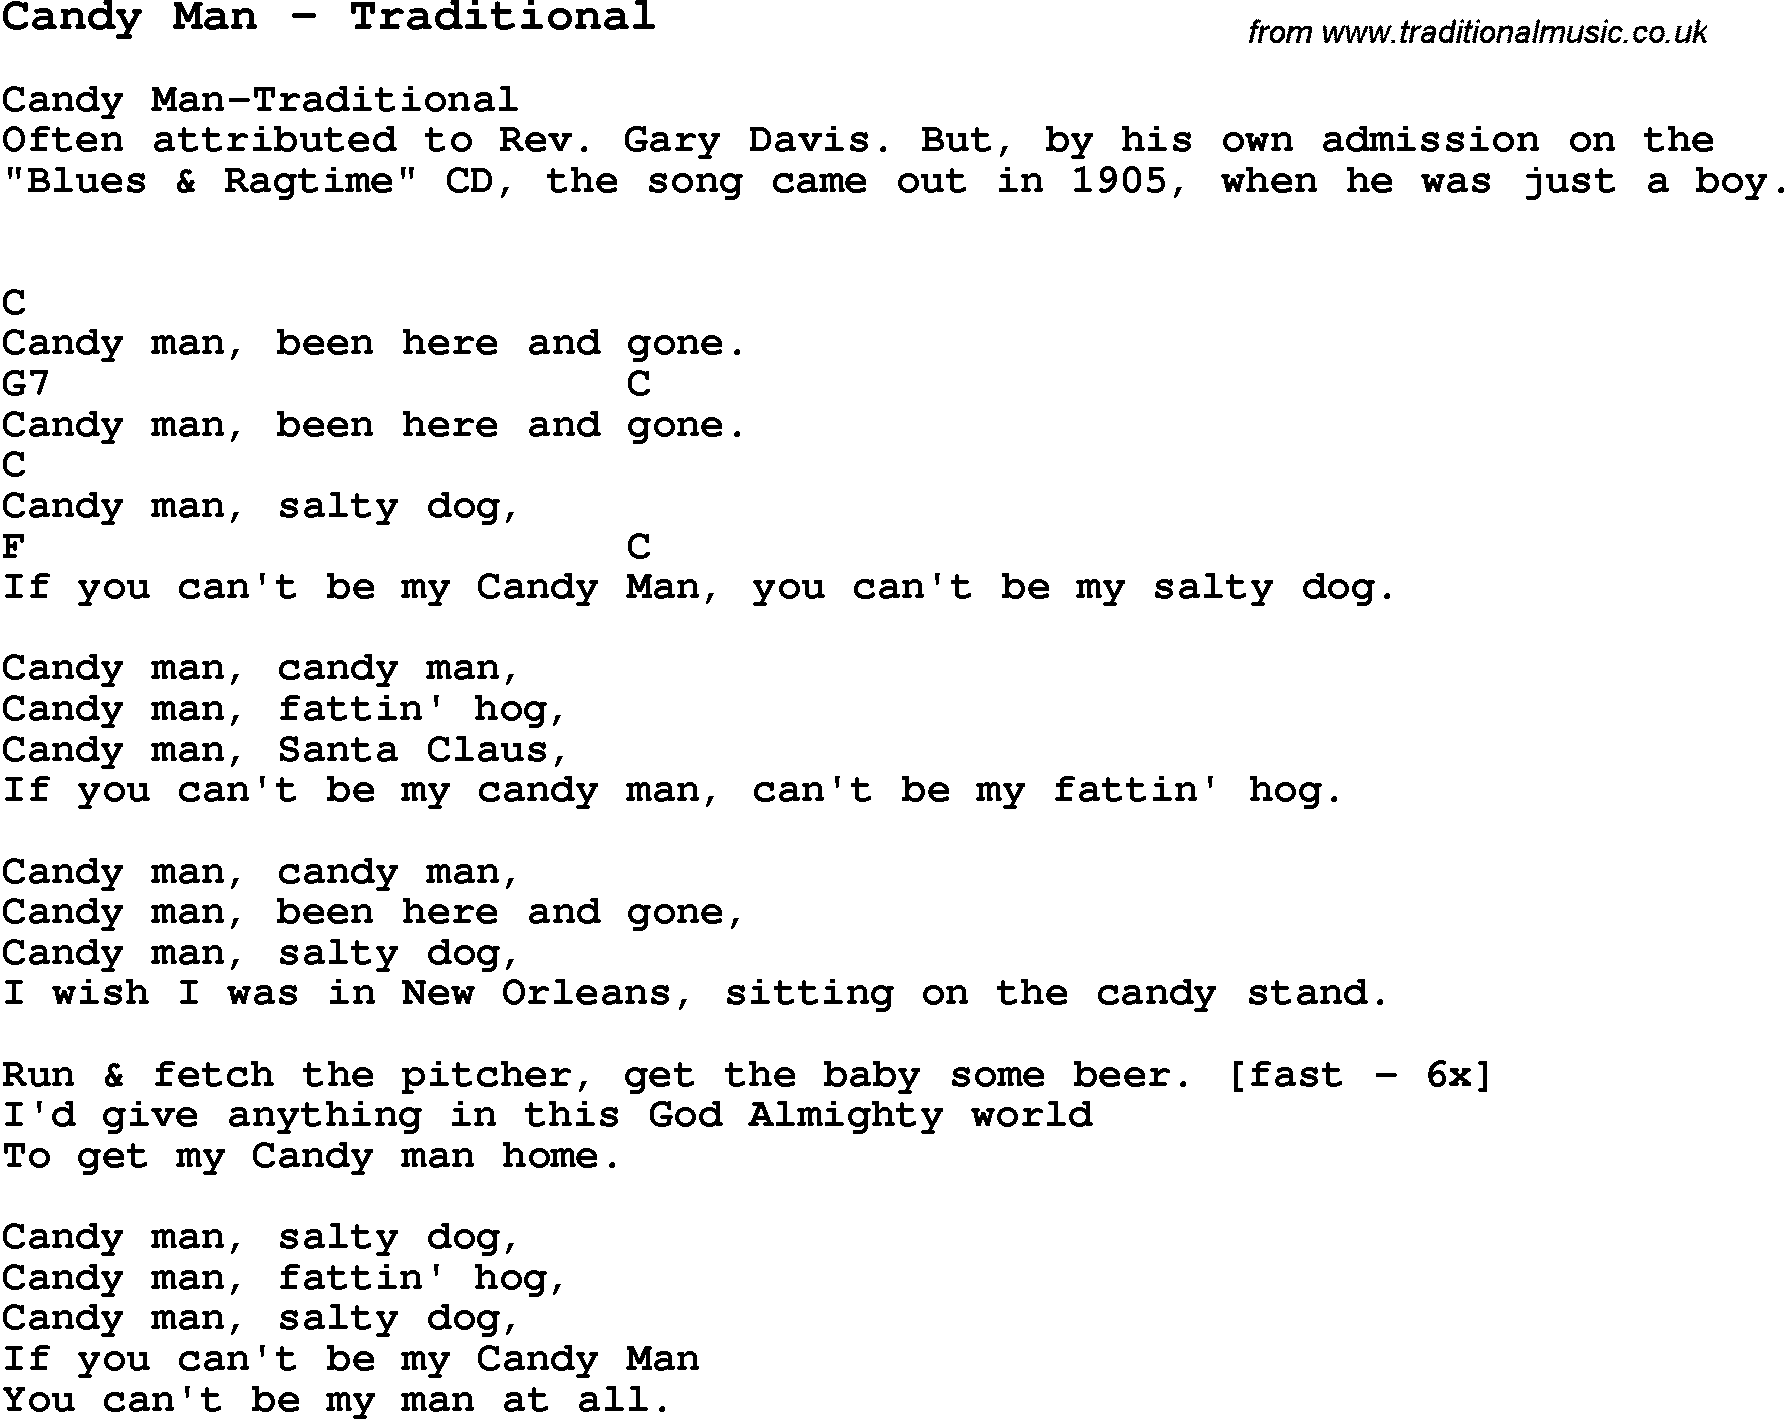 Song Candy Man by Traditional, with lyrics for vocal performance and accompaniment chords for Ukulele, Guitar Banjo etc.